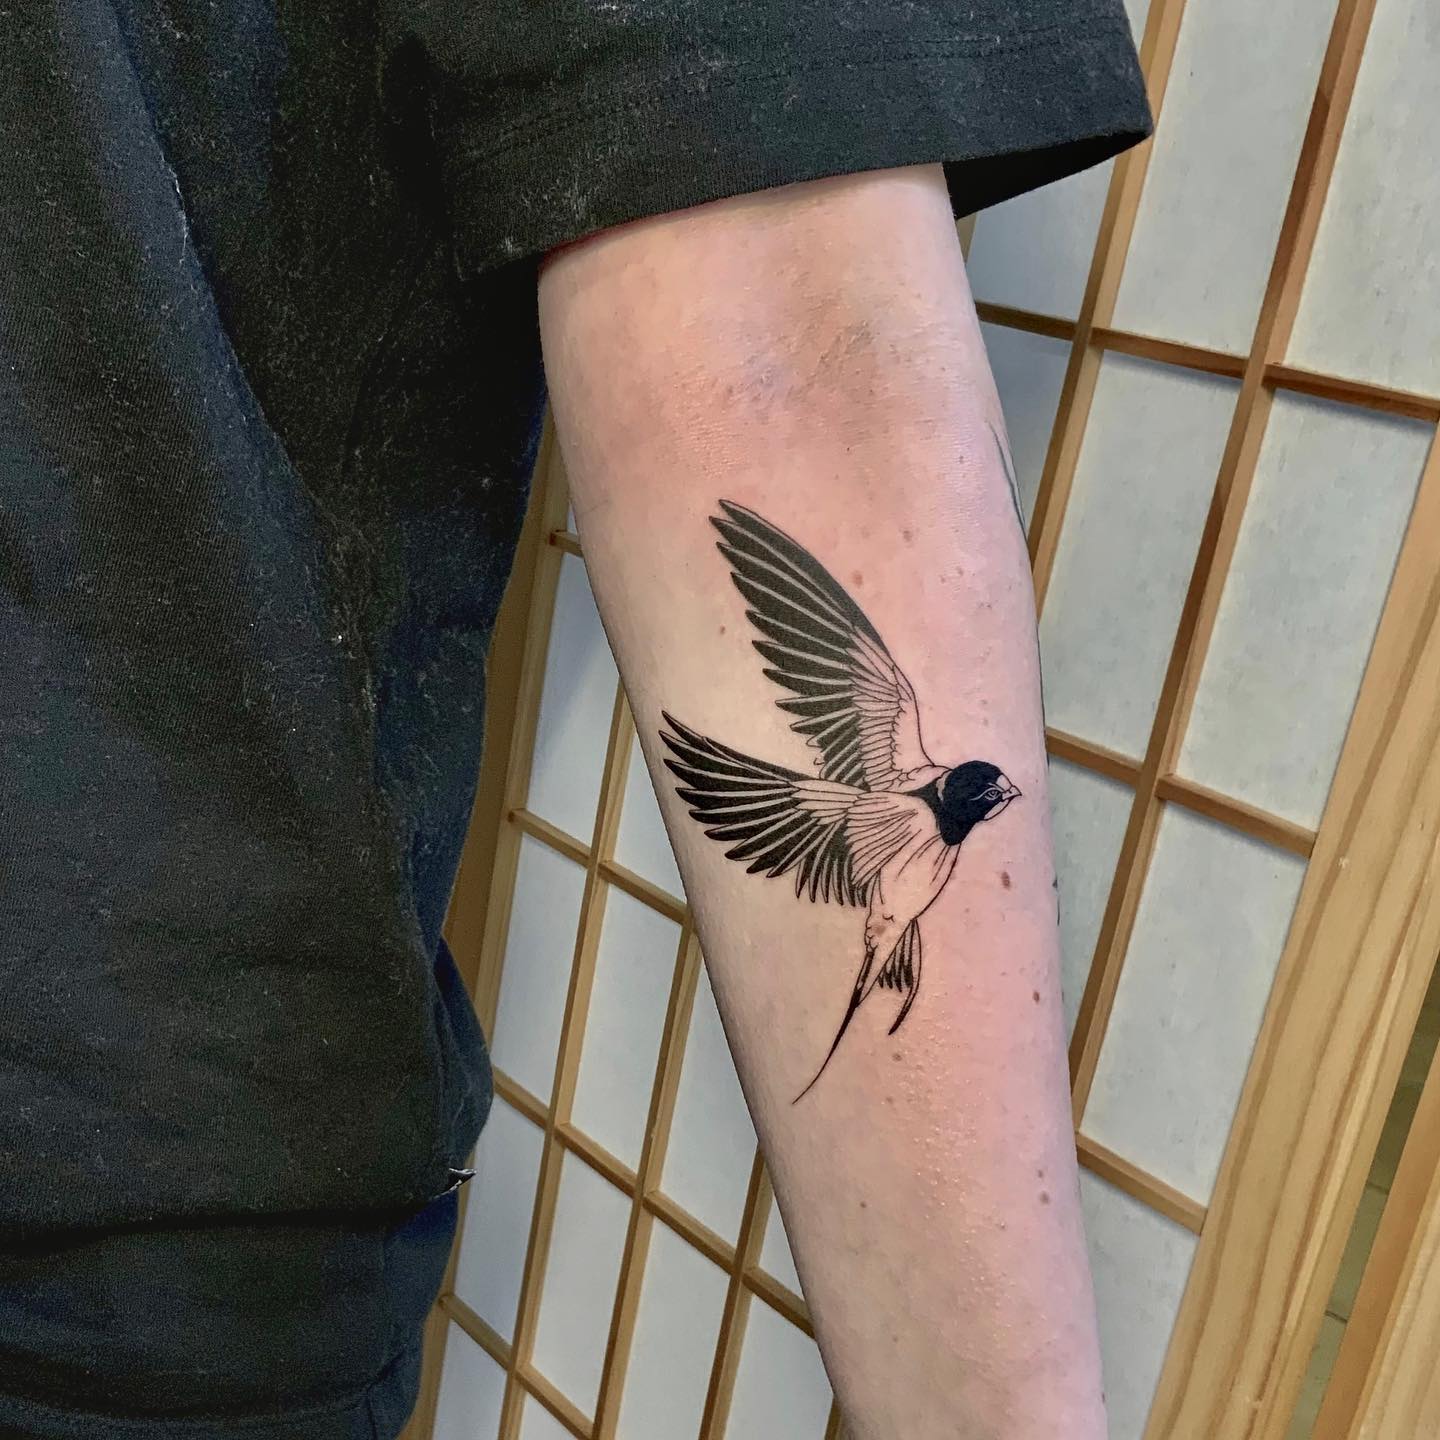 Swaallow tattoo by gien.amsterdam